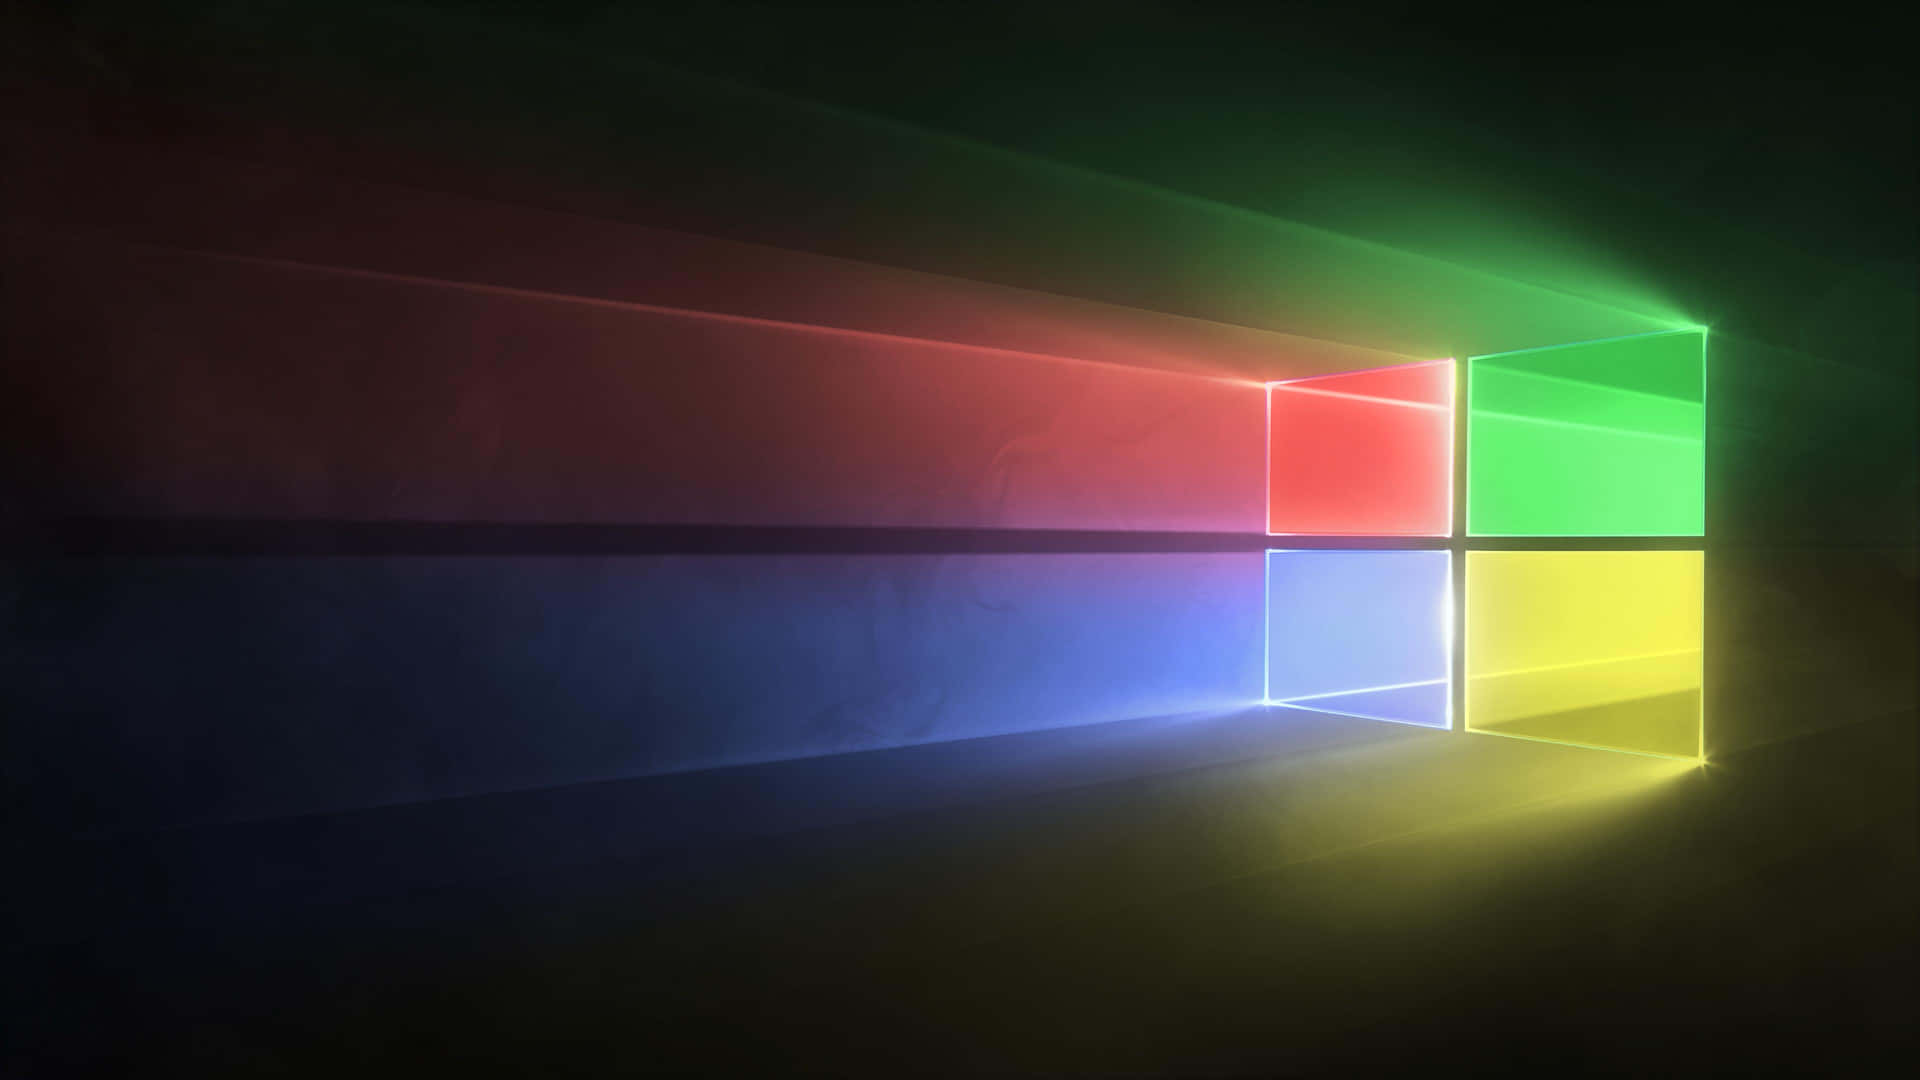 A close-up view of the default Windows background